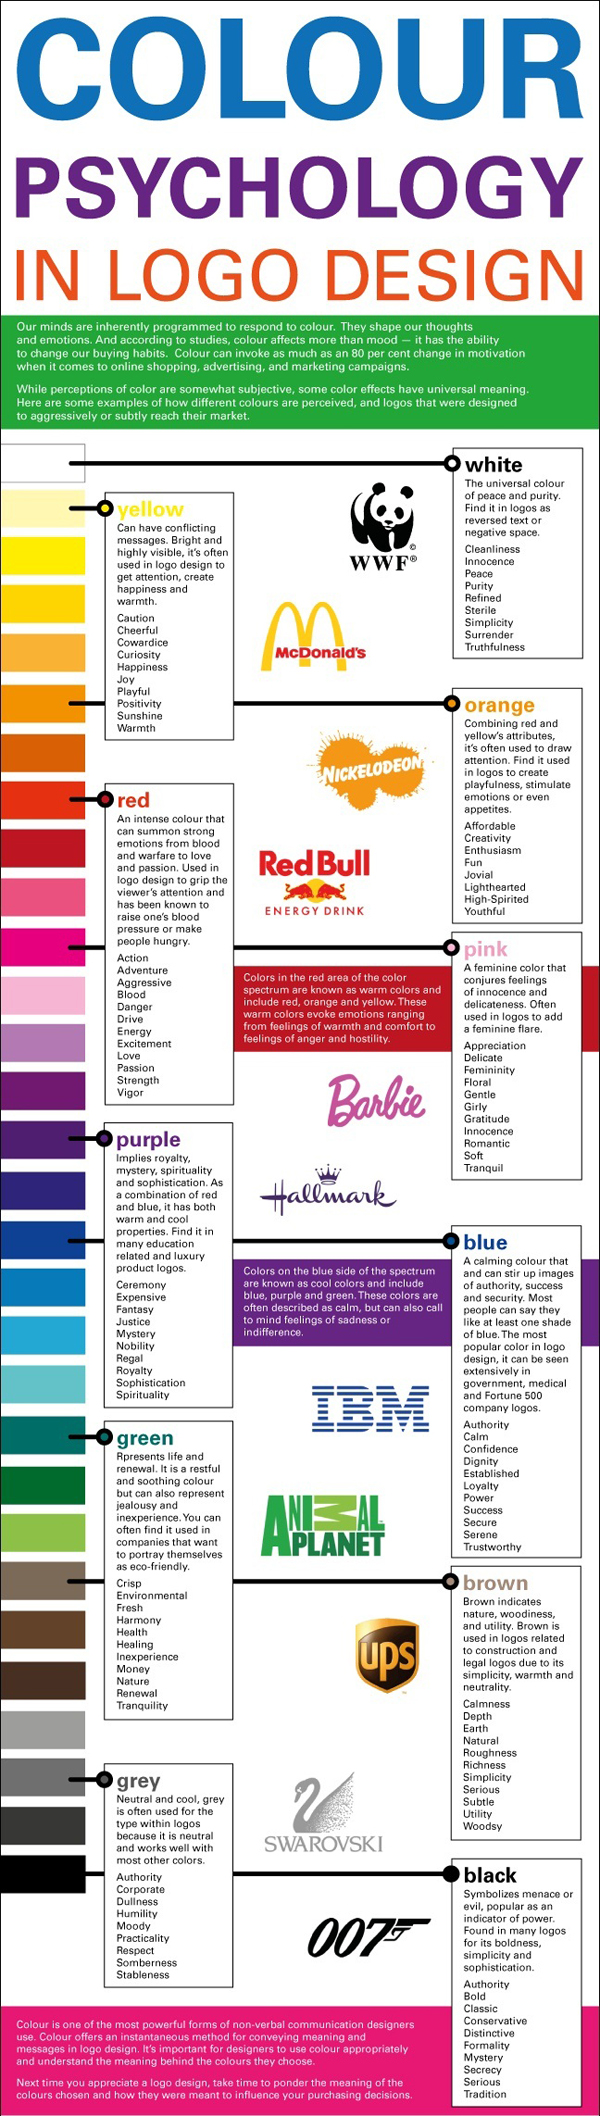 An infographic on color psychology created by Louise Myers. 12-Point SignWorks